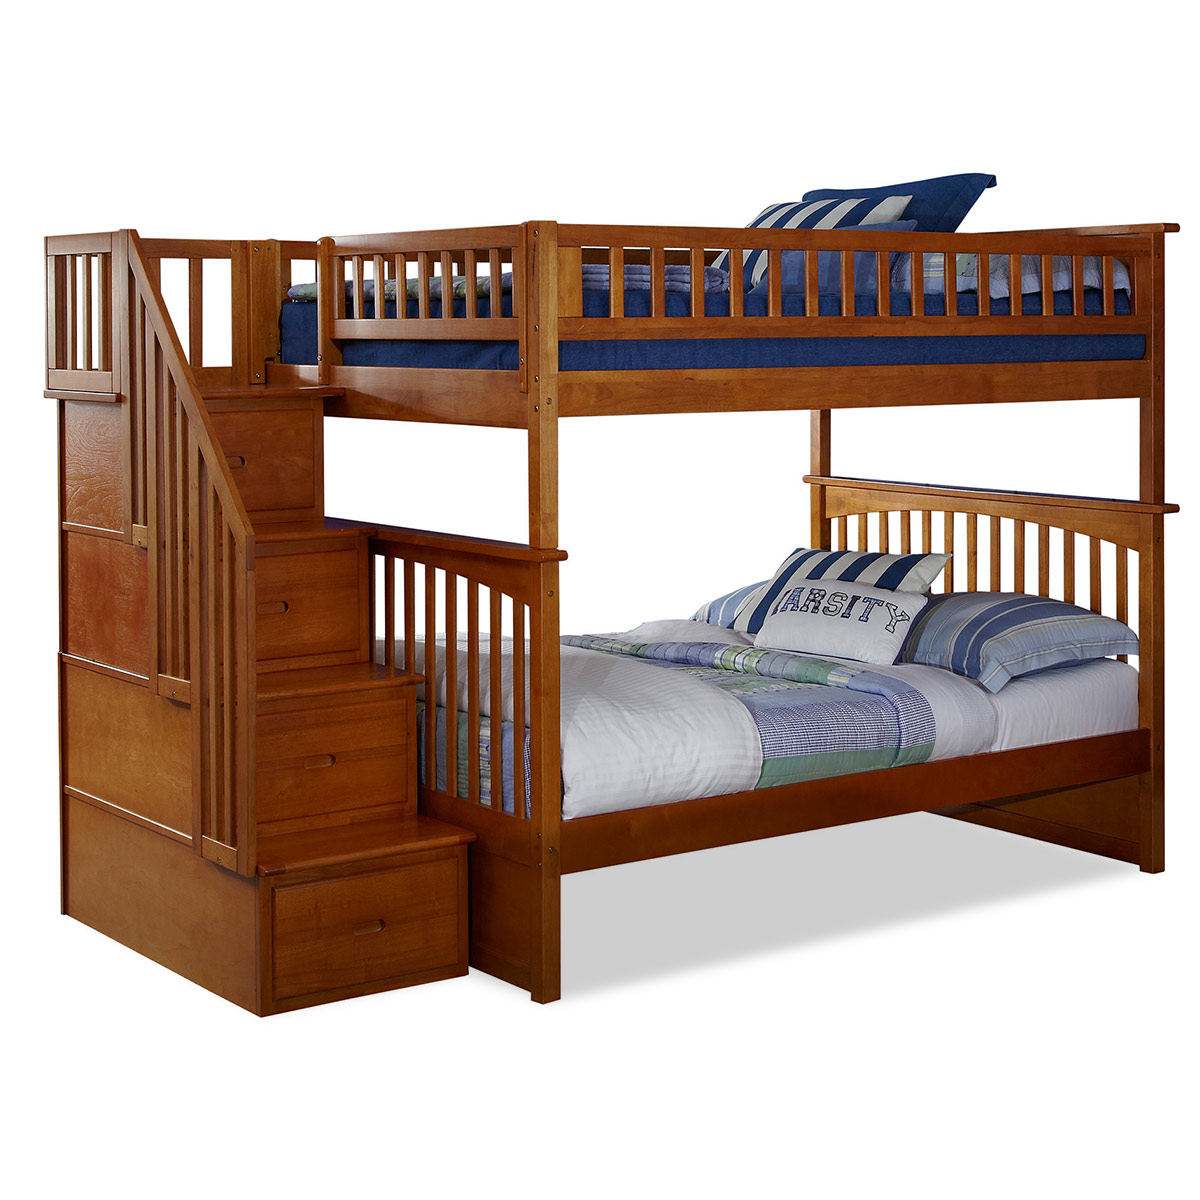 Giường tầng BOB upload/attachment/thumb/5846atlantic-furniture-columbia-staircase-full-over-full-storage-bunk-bed-in-caramel-latte-37.jpg